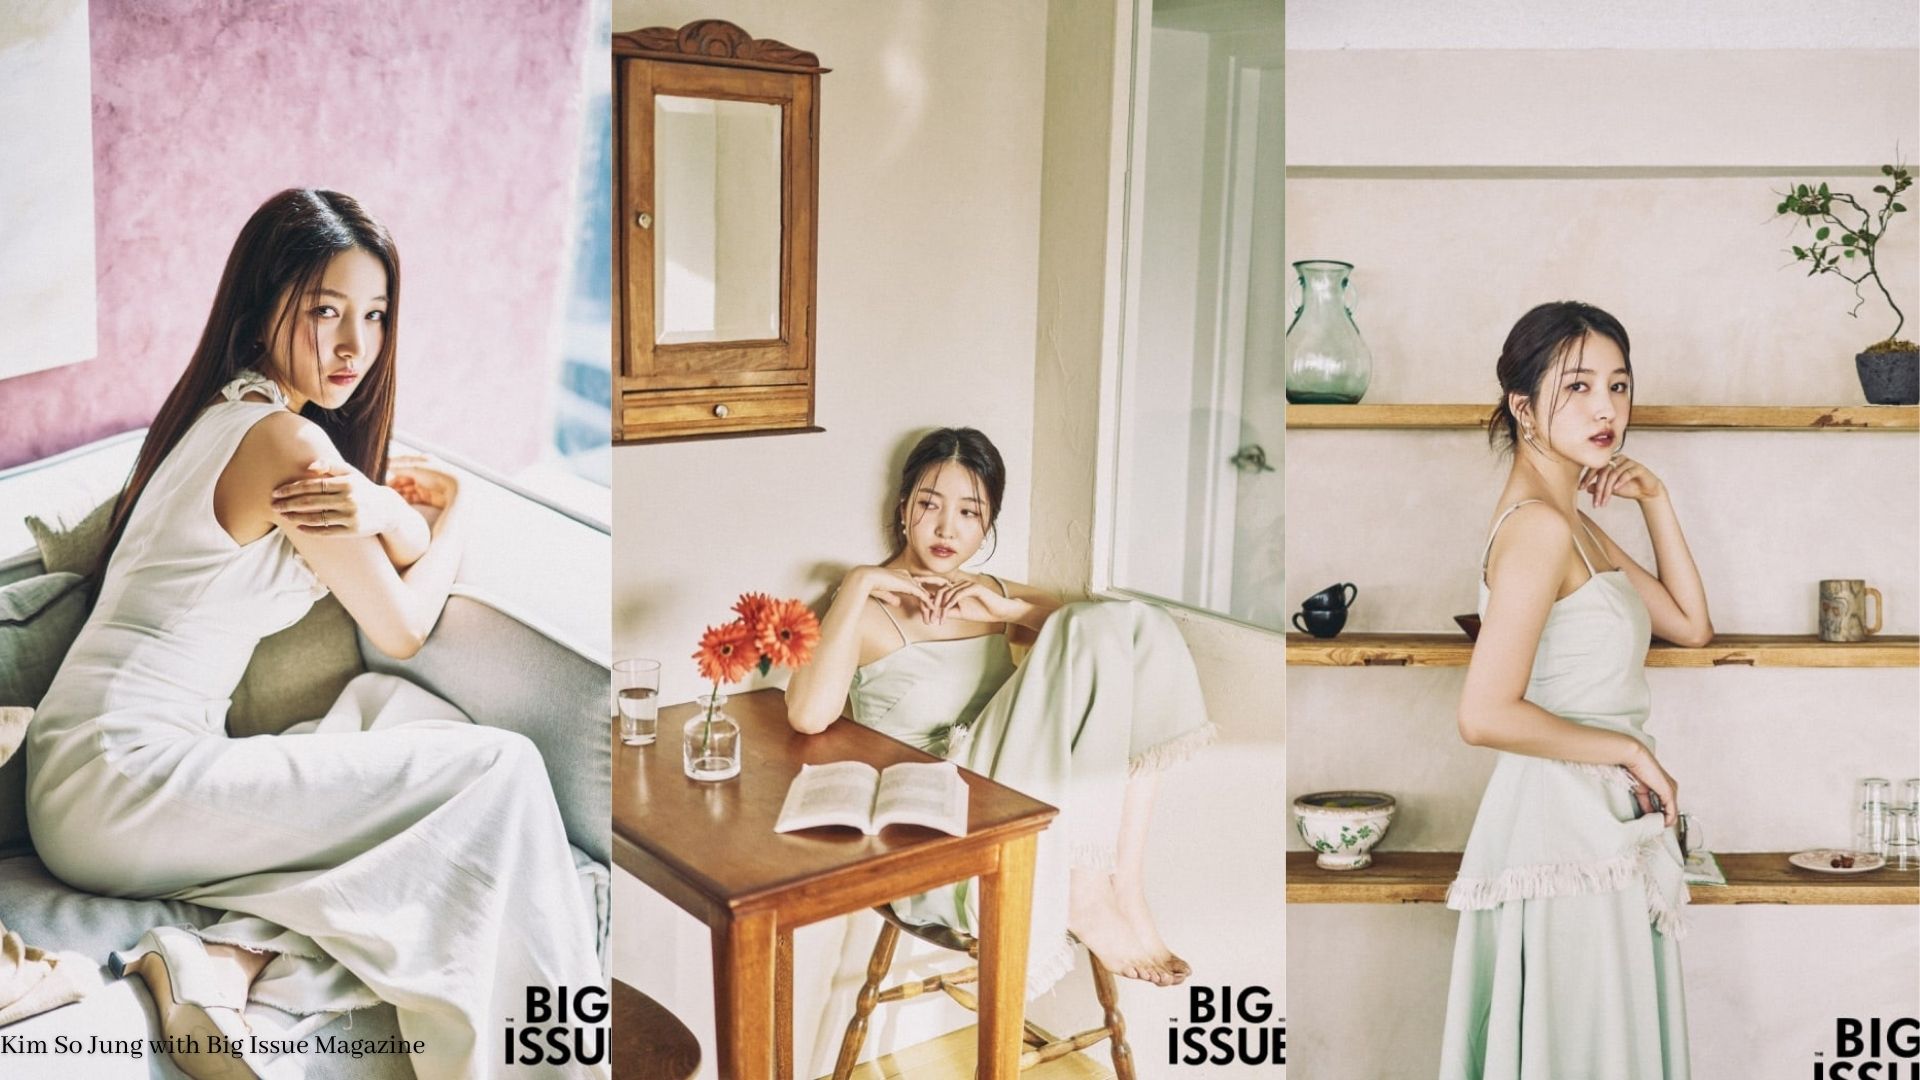 Kim So Jung Big Issue Interview – The Artist Talks About Her Acting Career & More